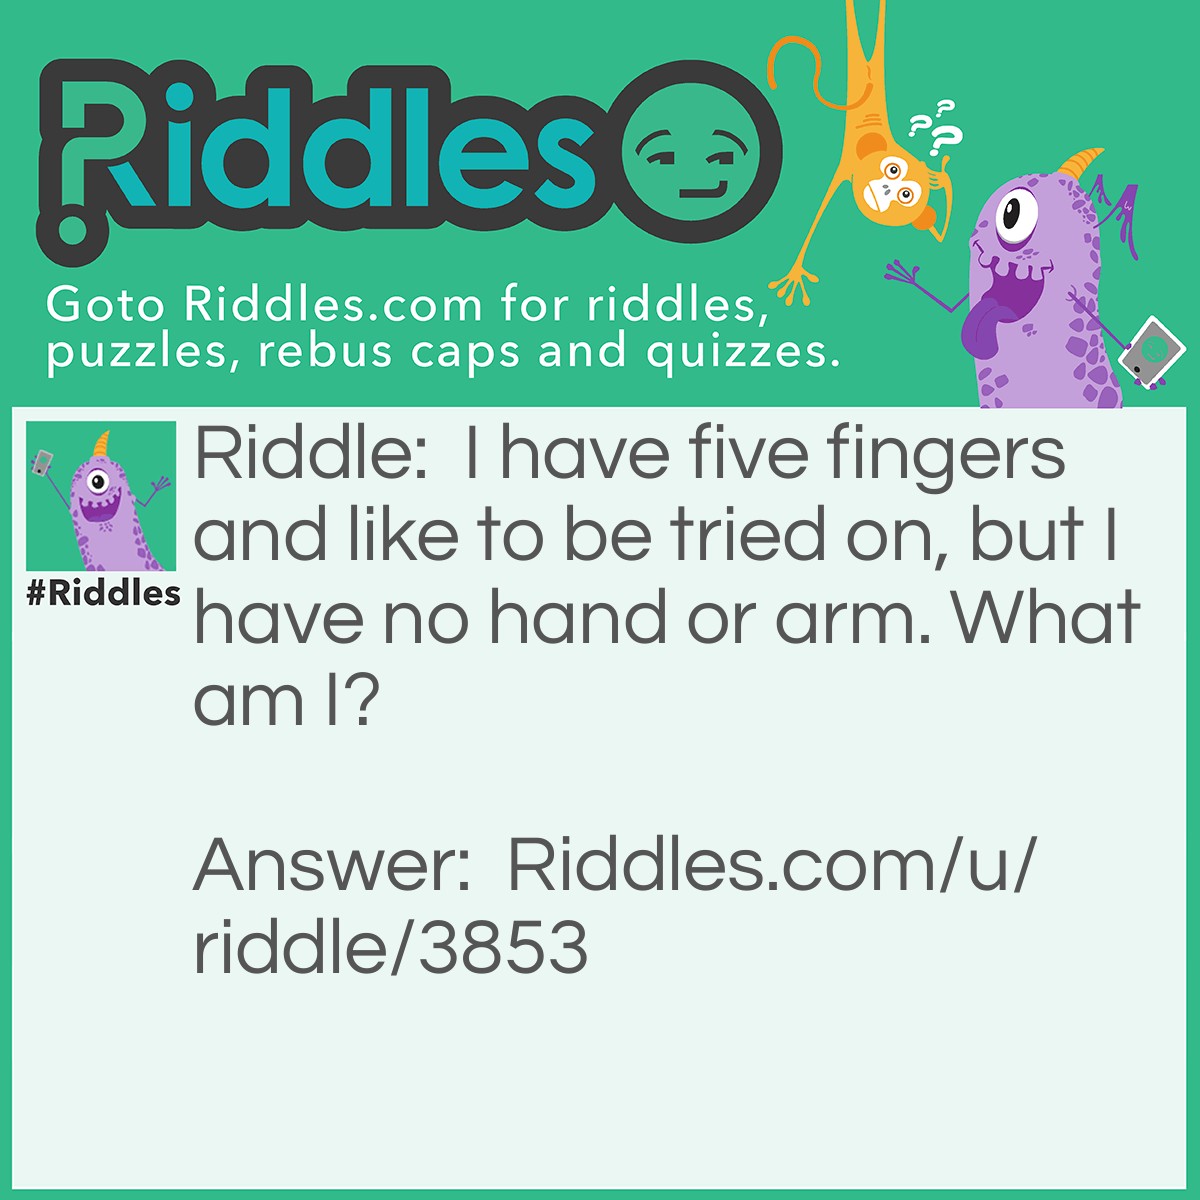 Riddle: I have five fingers and like to be tried on, but I have no hand or arm. What am I? Answer: A Glove!!!